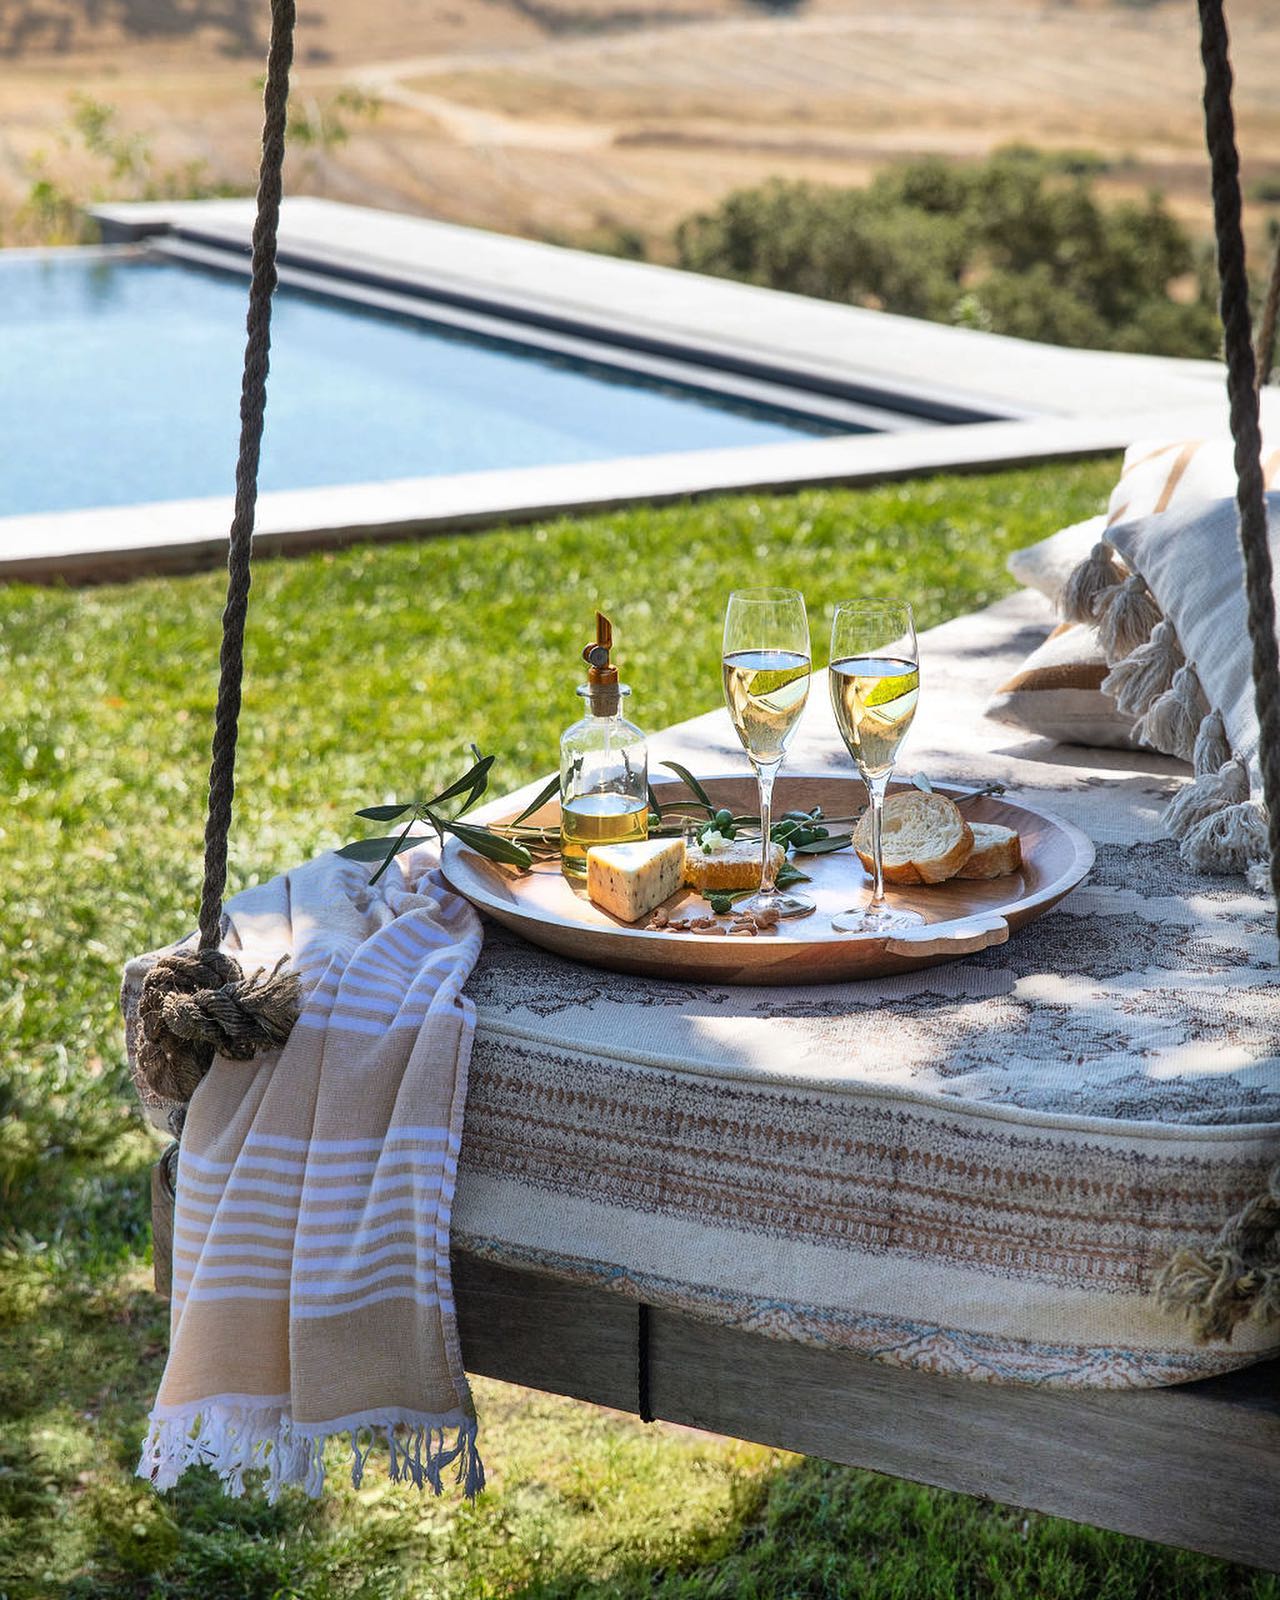 Outdoor tasting experience by the pool